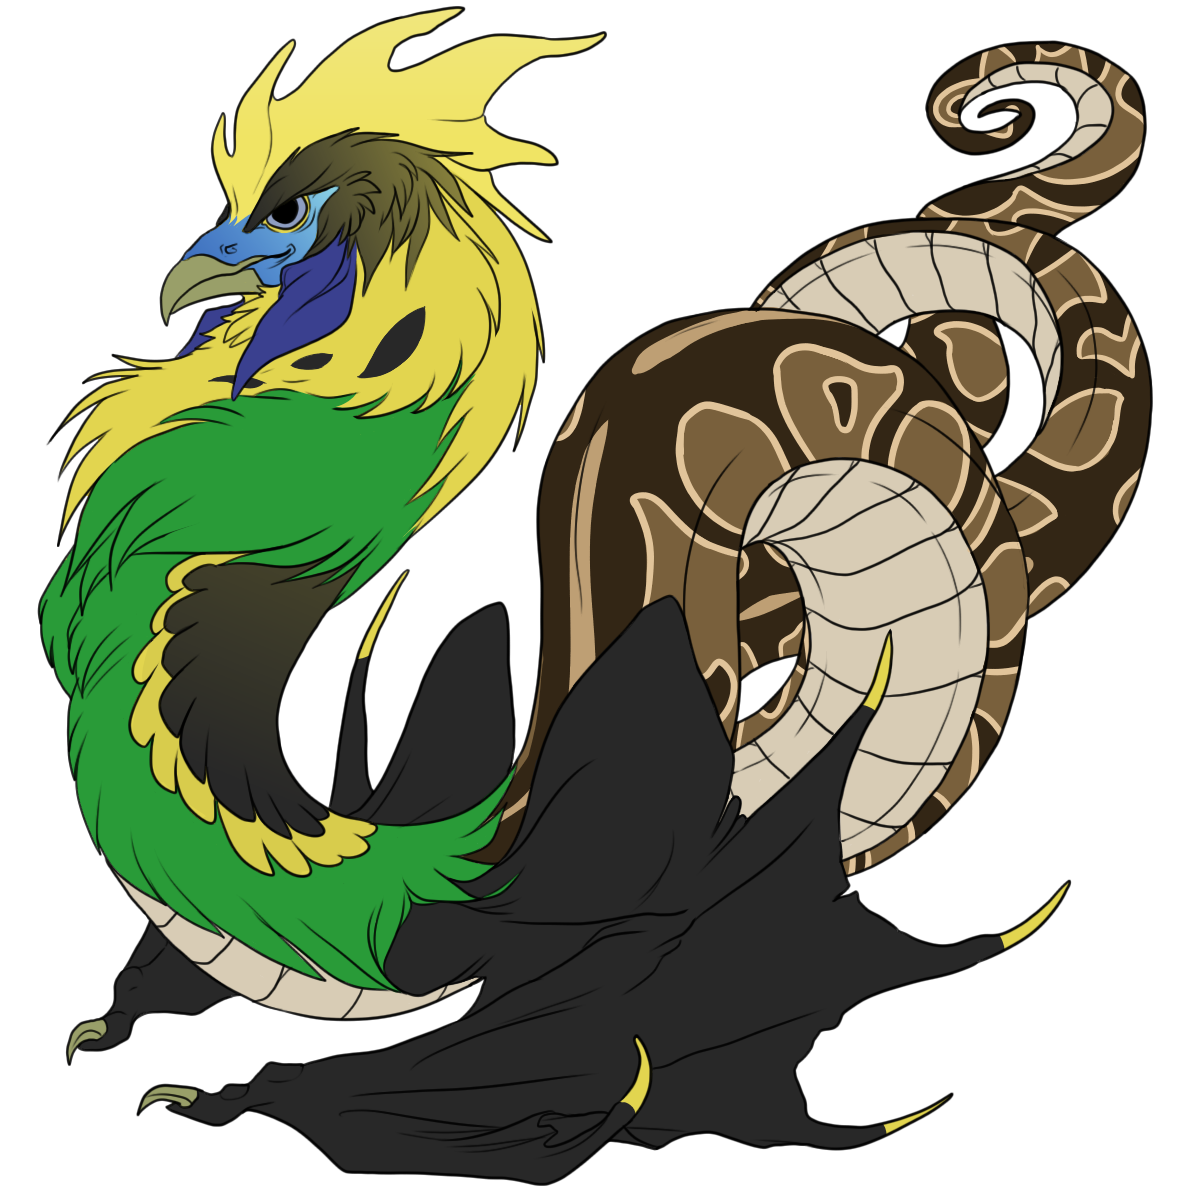 fr_familiar_coloring_contest_2_by_imaginescalemates-dbv946c.png